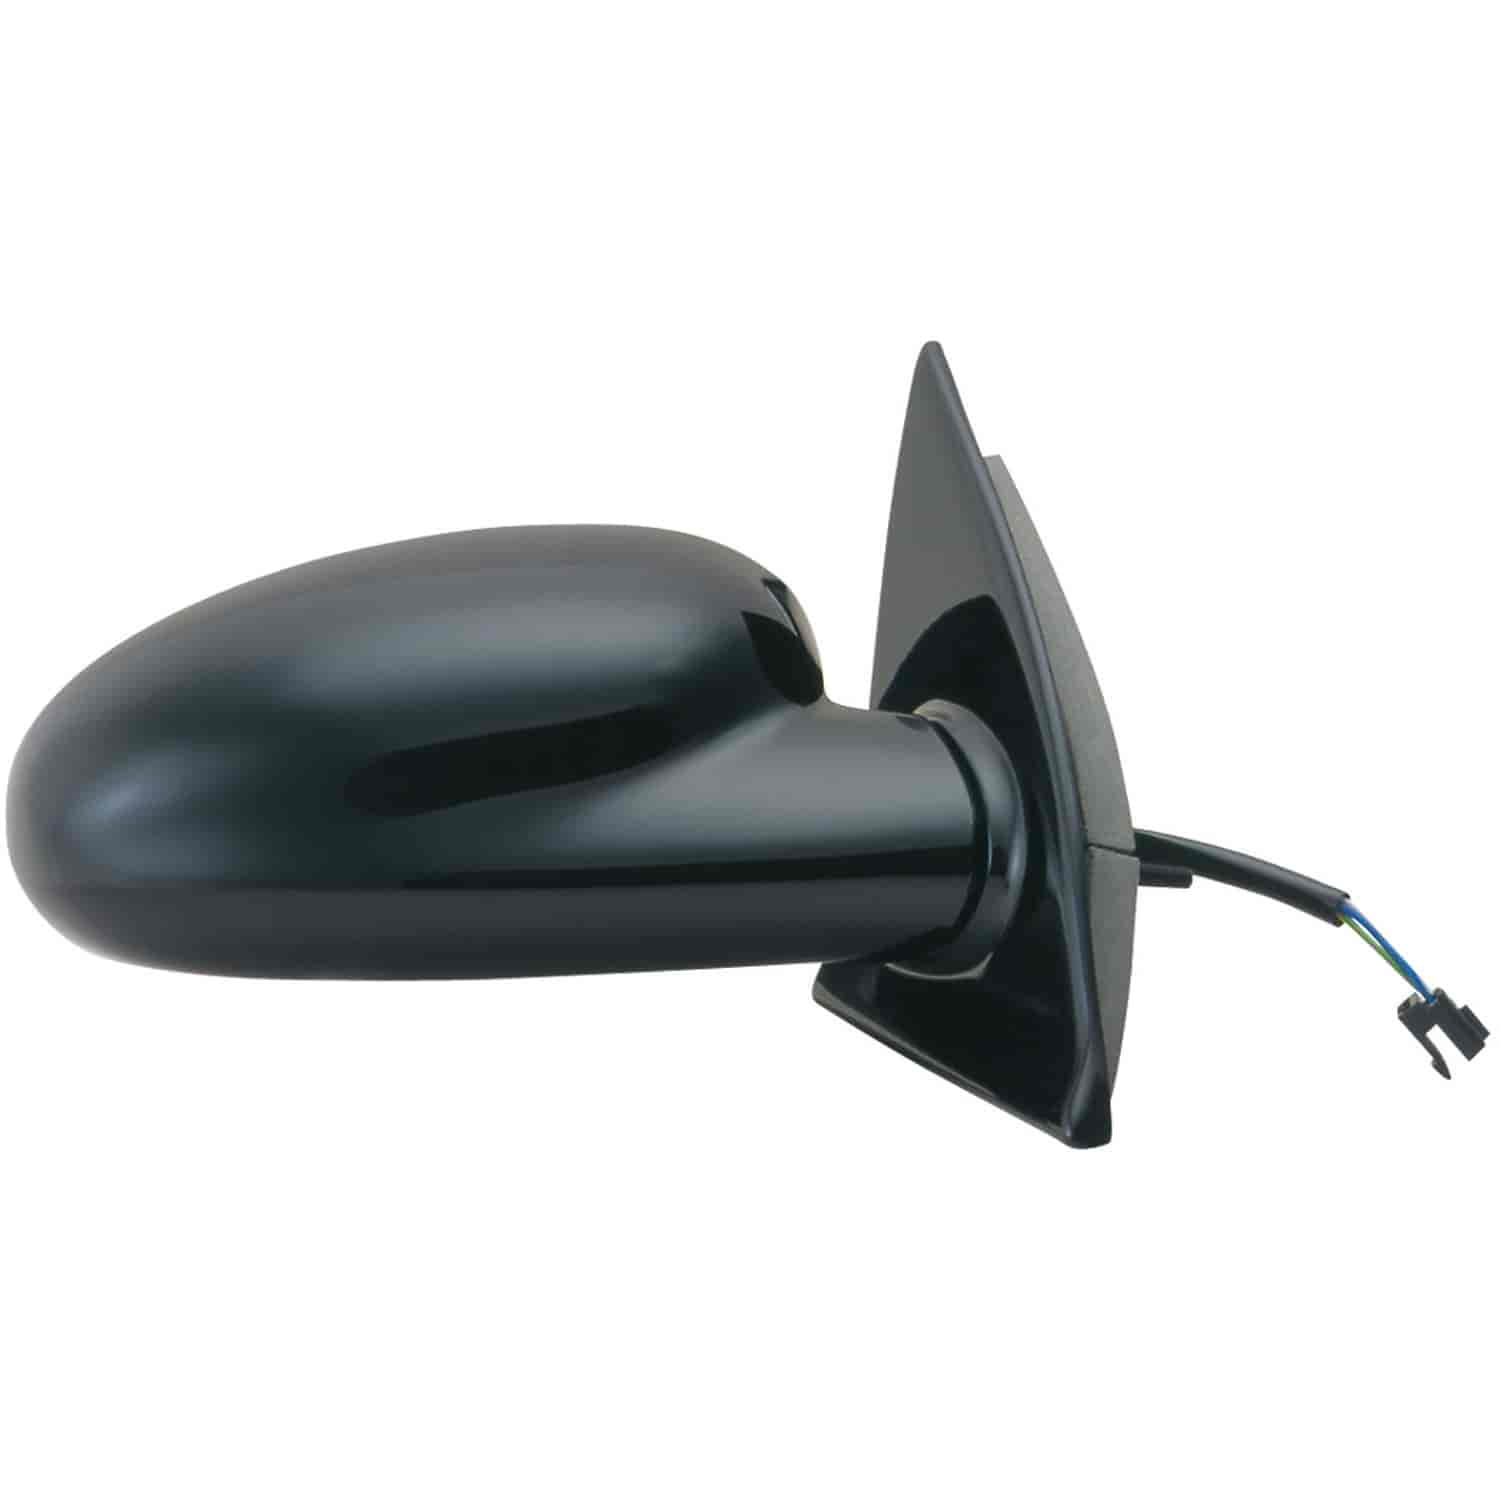 OEM Style Replacement mirror for 97-02 Saturn S Series Coupe passenger side mirror tested to fit and